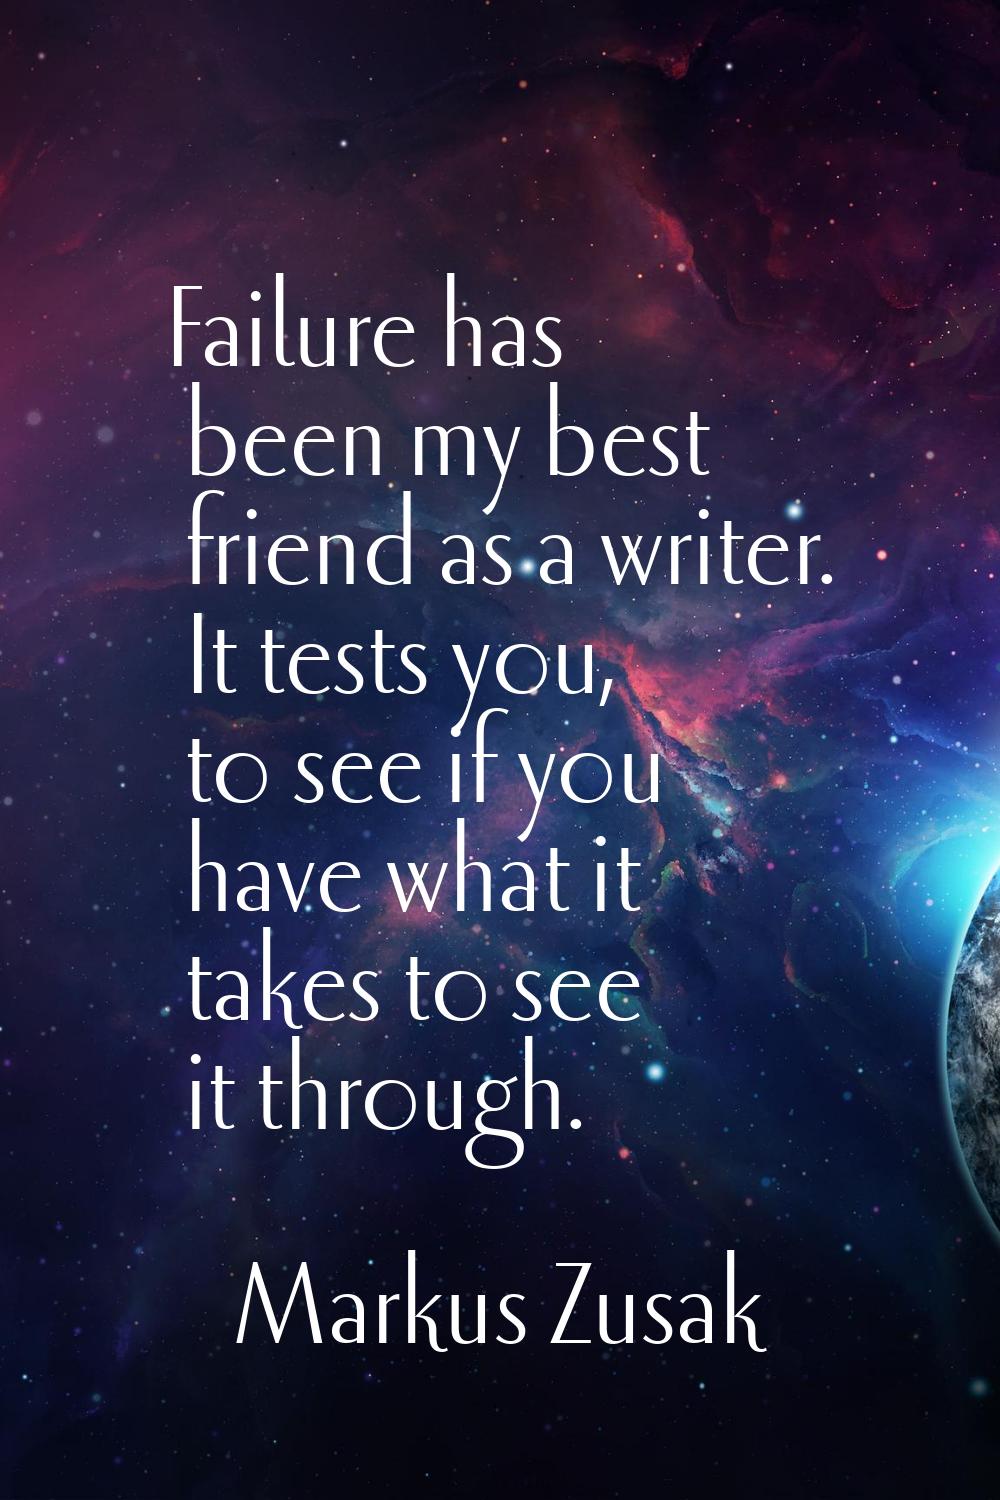 Failure has been my best friend as a writer. It tests you, to see if you have what it takes to see 